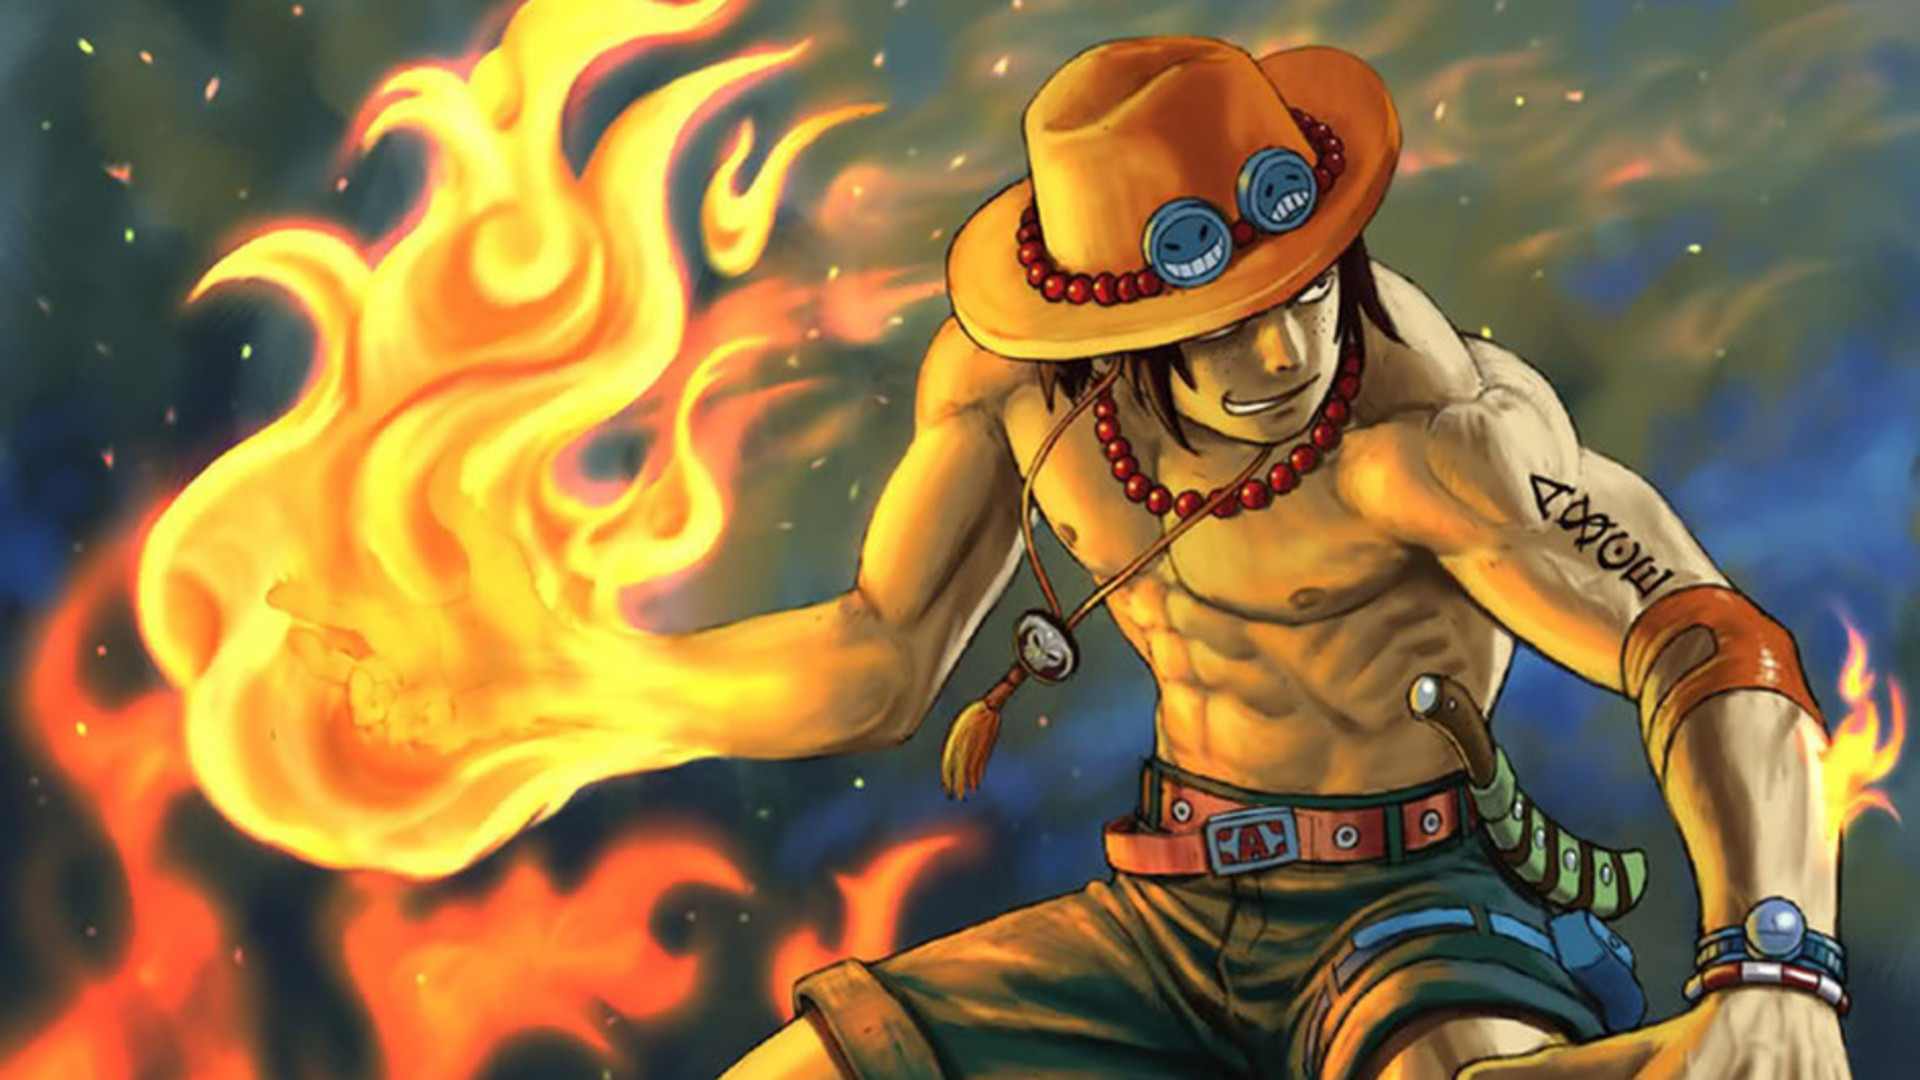 Ace One Piece Wallpapers | one piece | Pinterest | One Piece, One ...